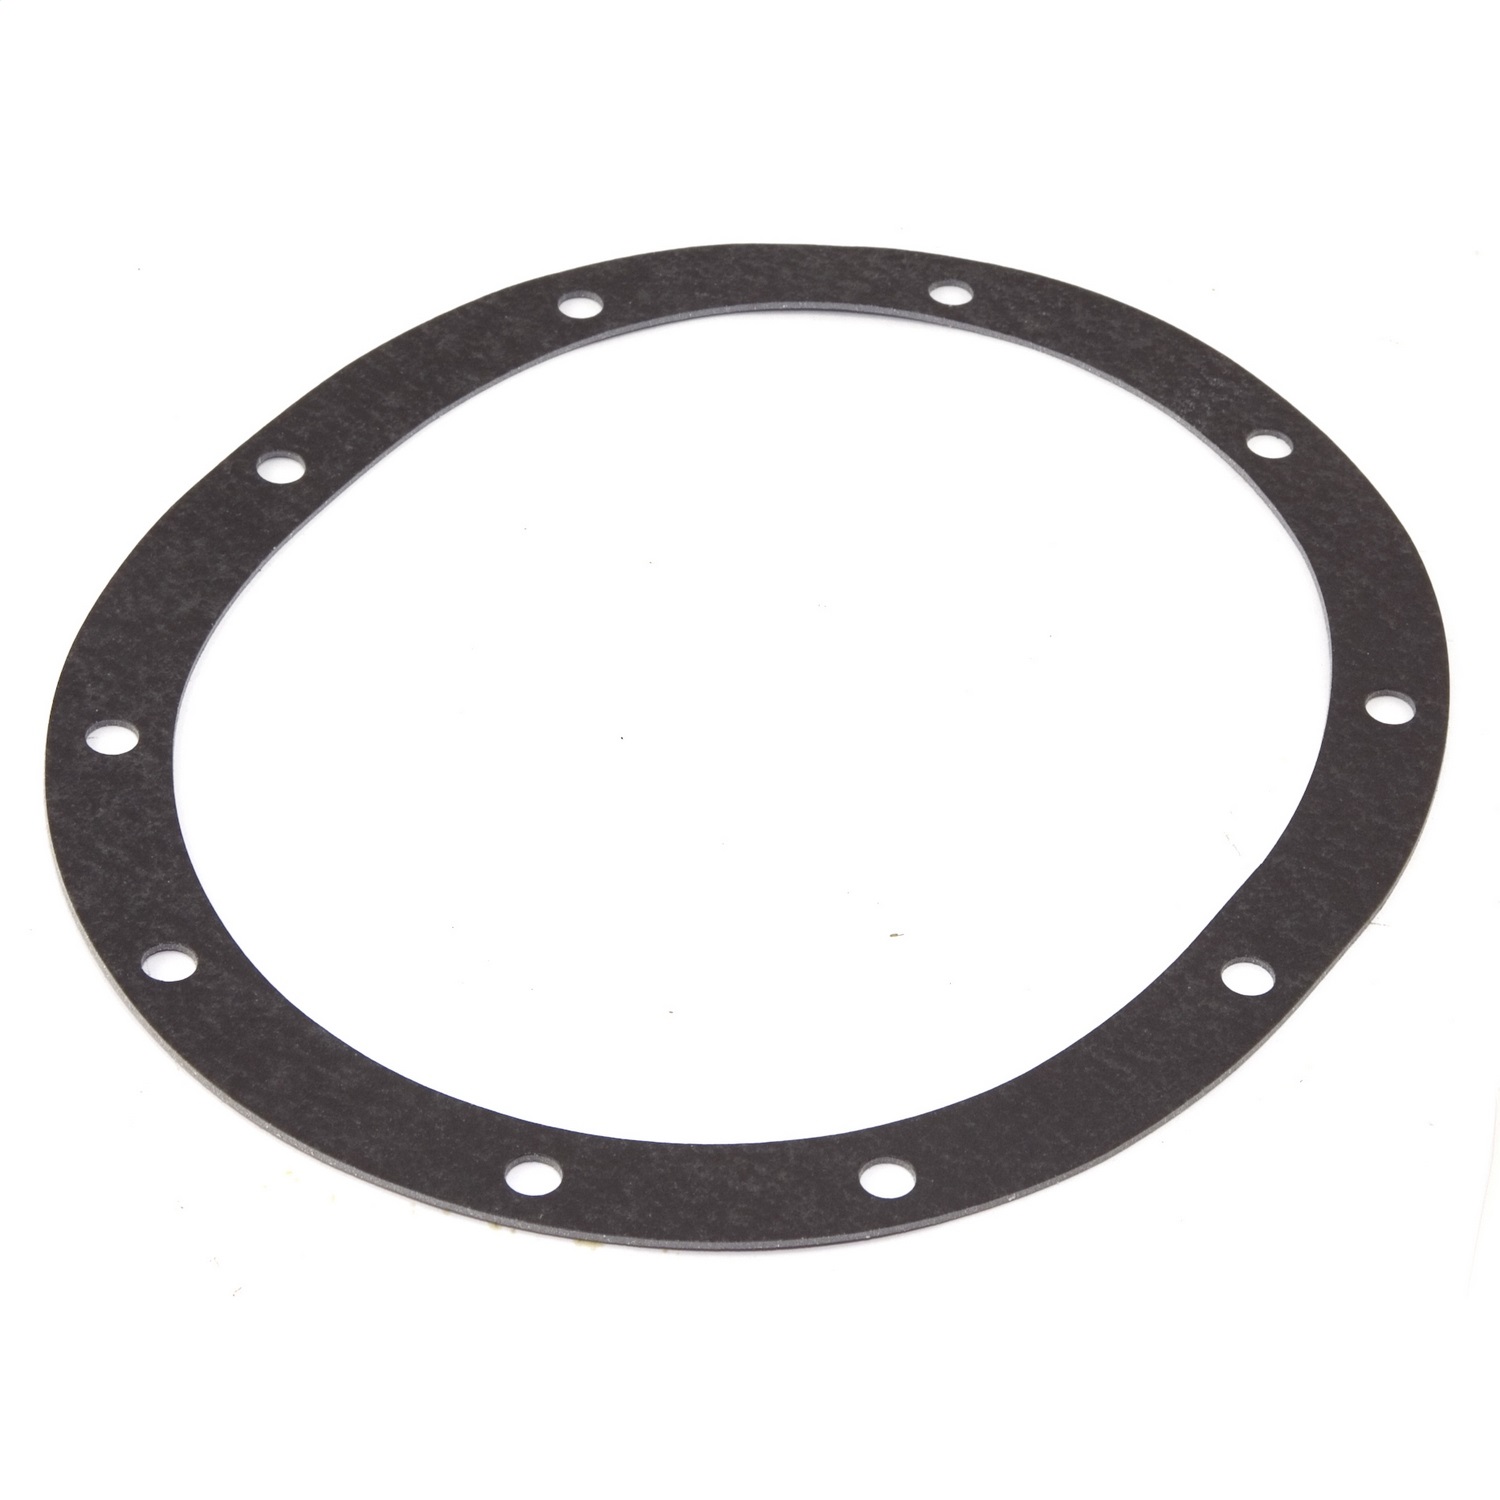 Omix-Ada Omix-Ada 16502.04 Differential Cover Gasket